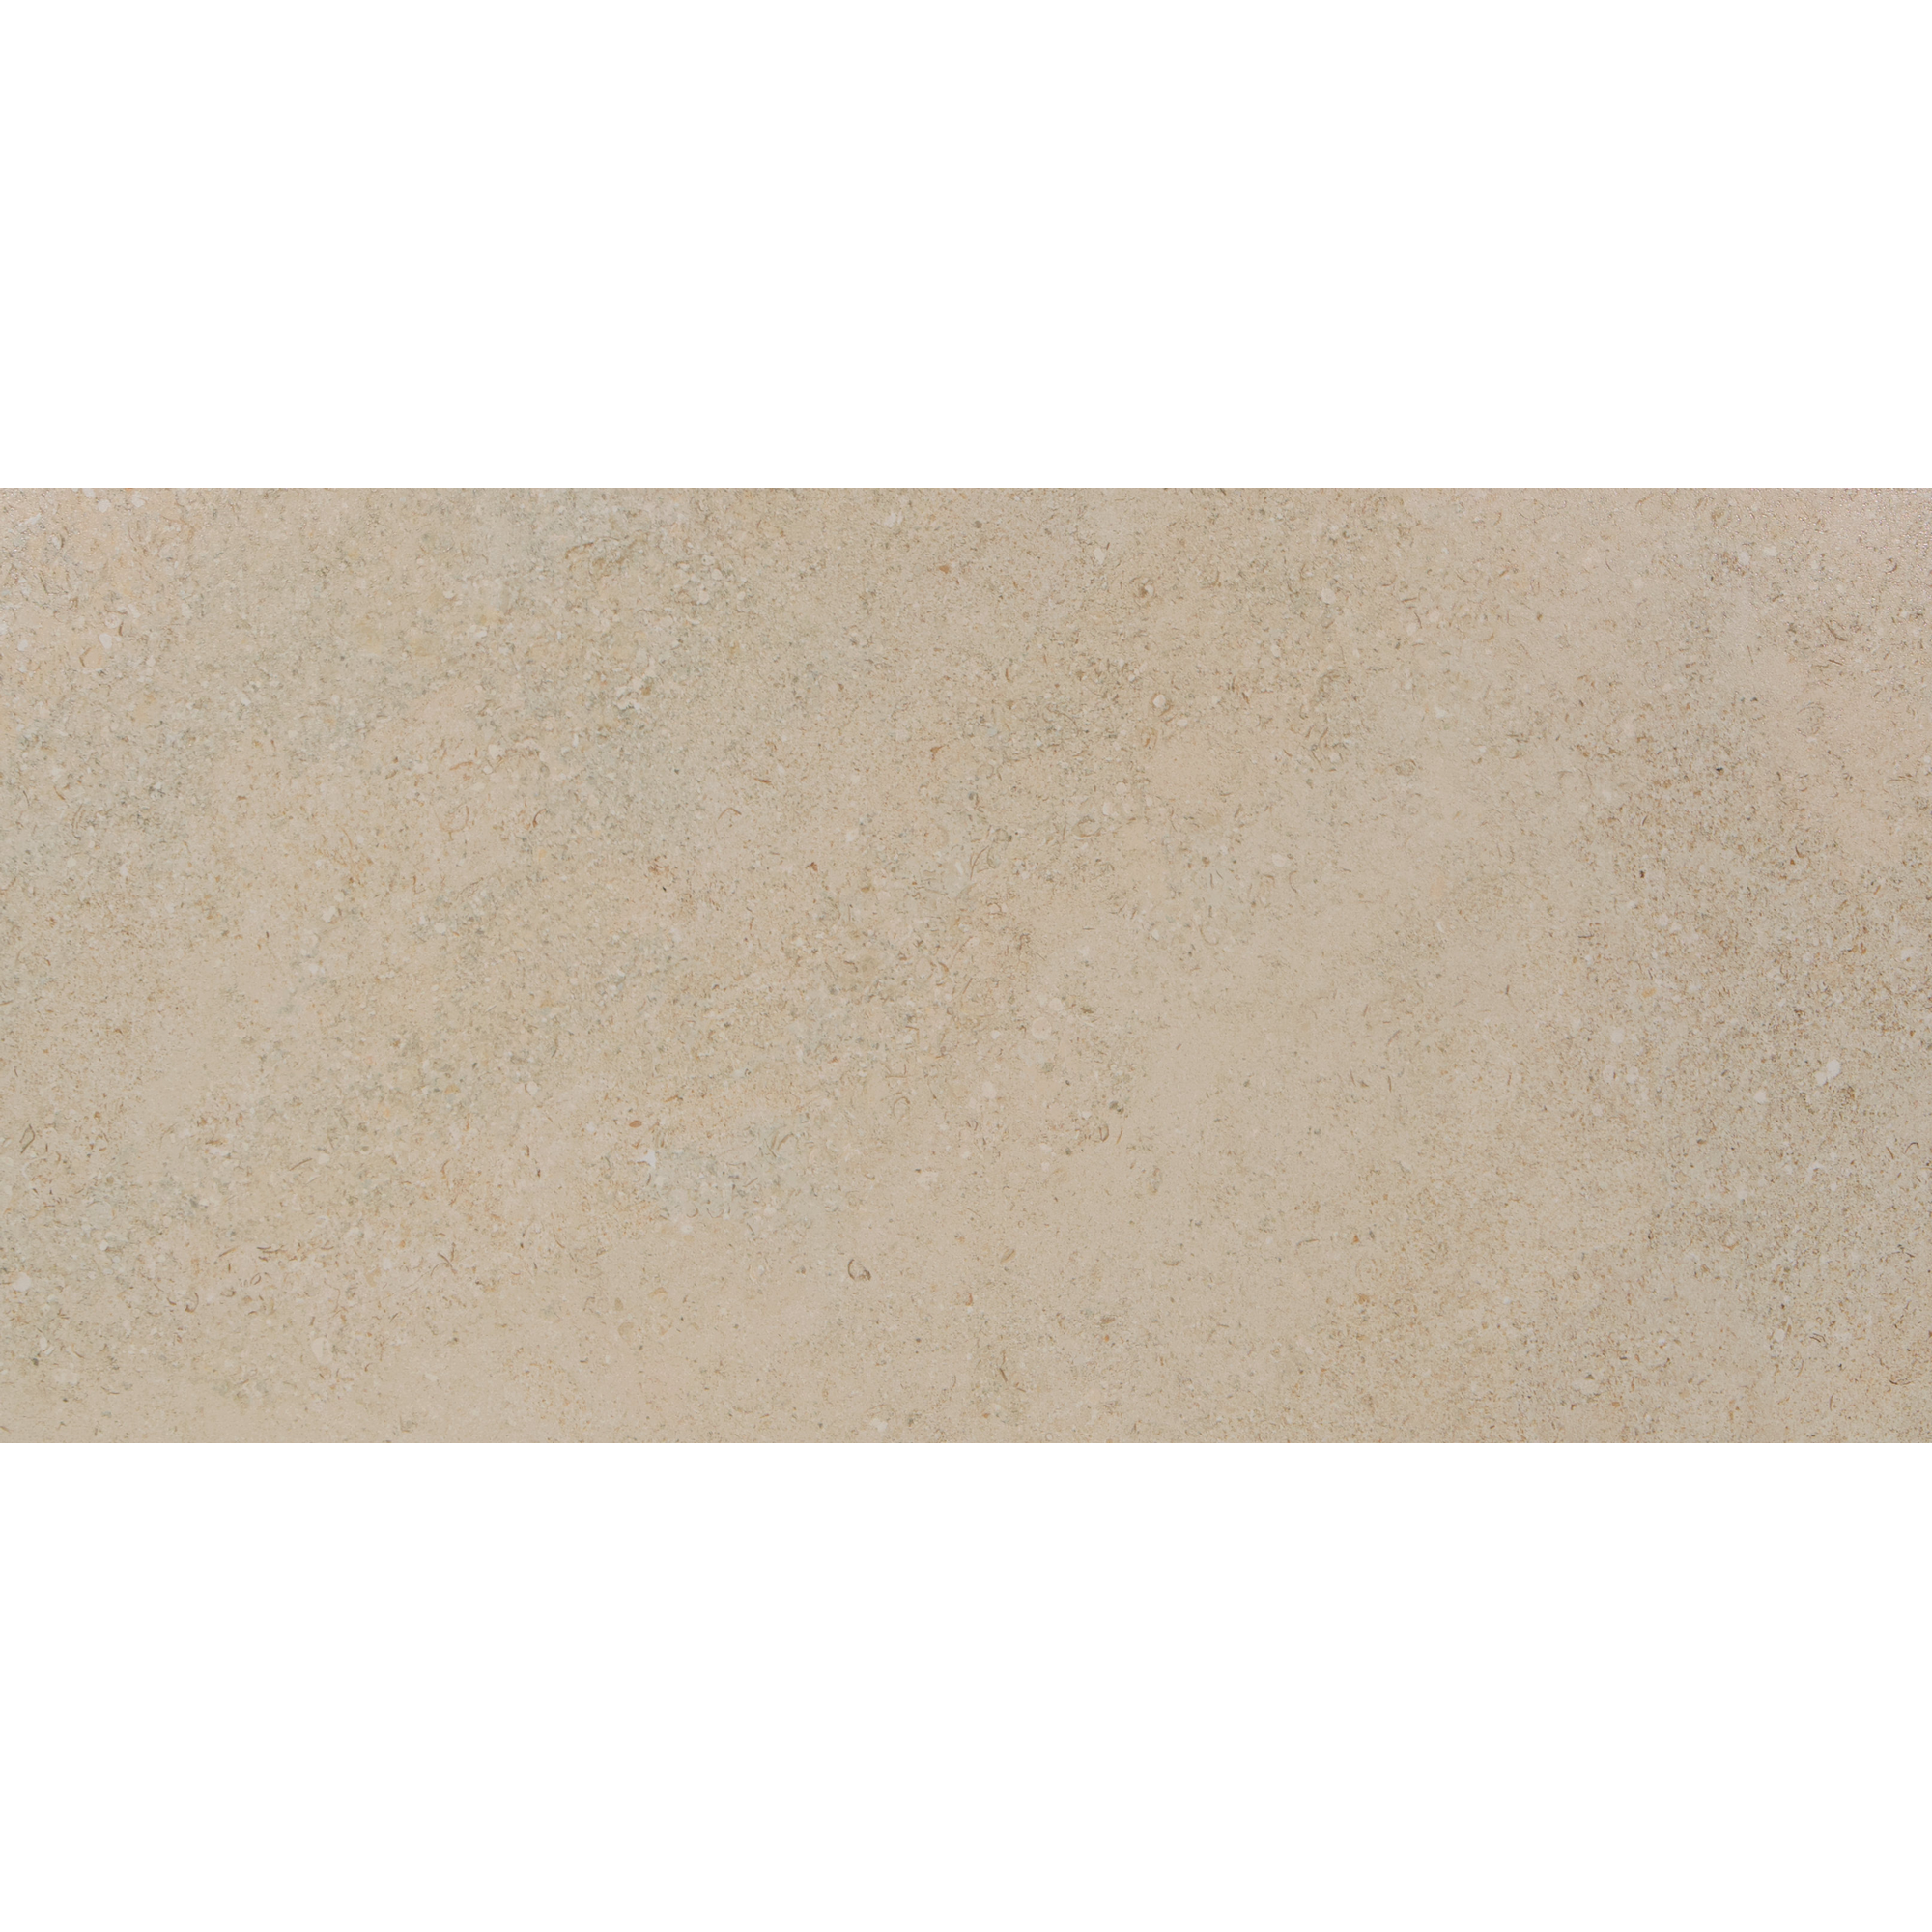 Bodenfliese 'Lims' beige 30 x 60 cm + product picture